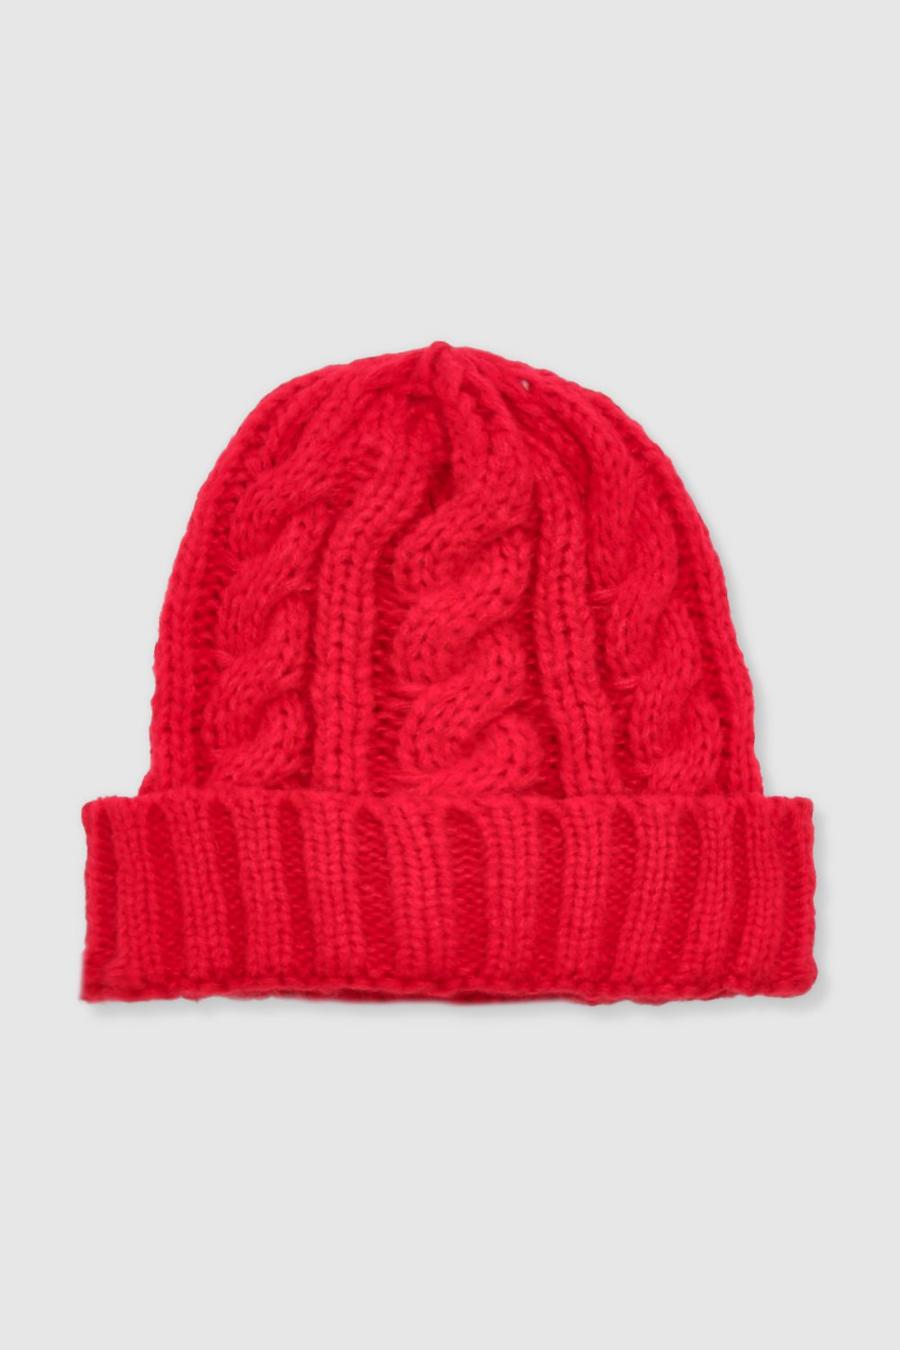 Chunky Red Cable Knit Beanie